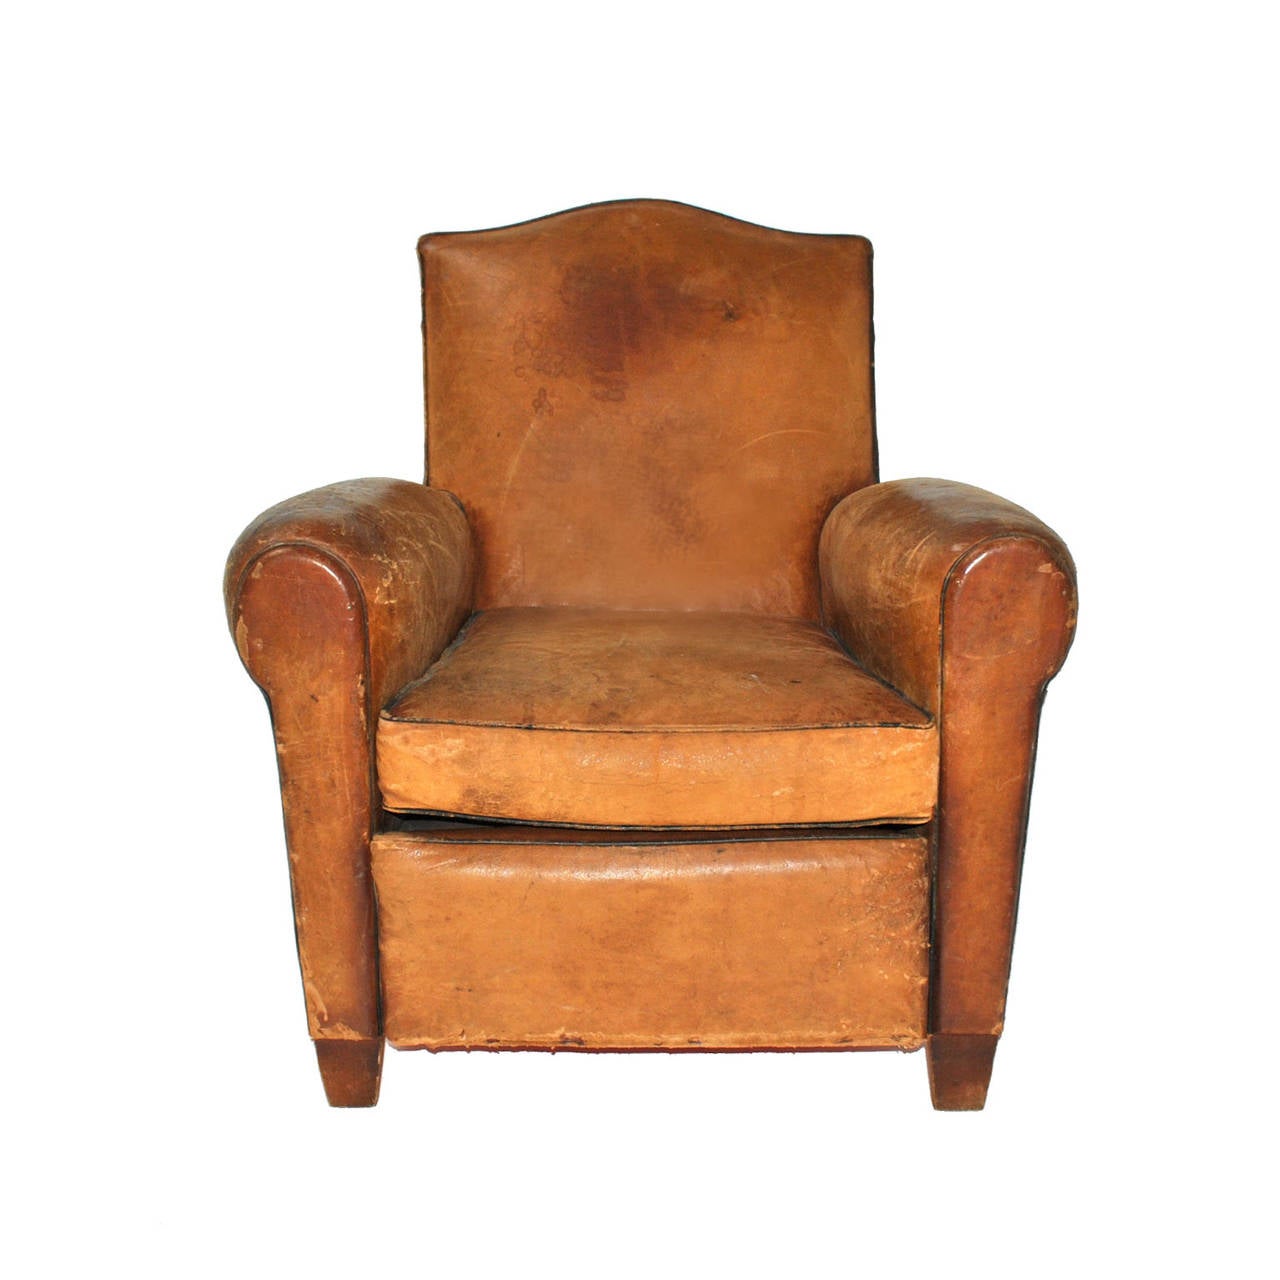 Pair of club armchair with structure made in solid wood upholstered in leather and finished in brass tack at back.